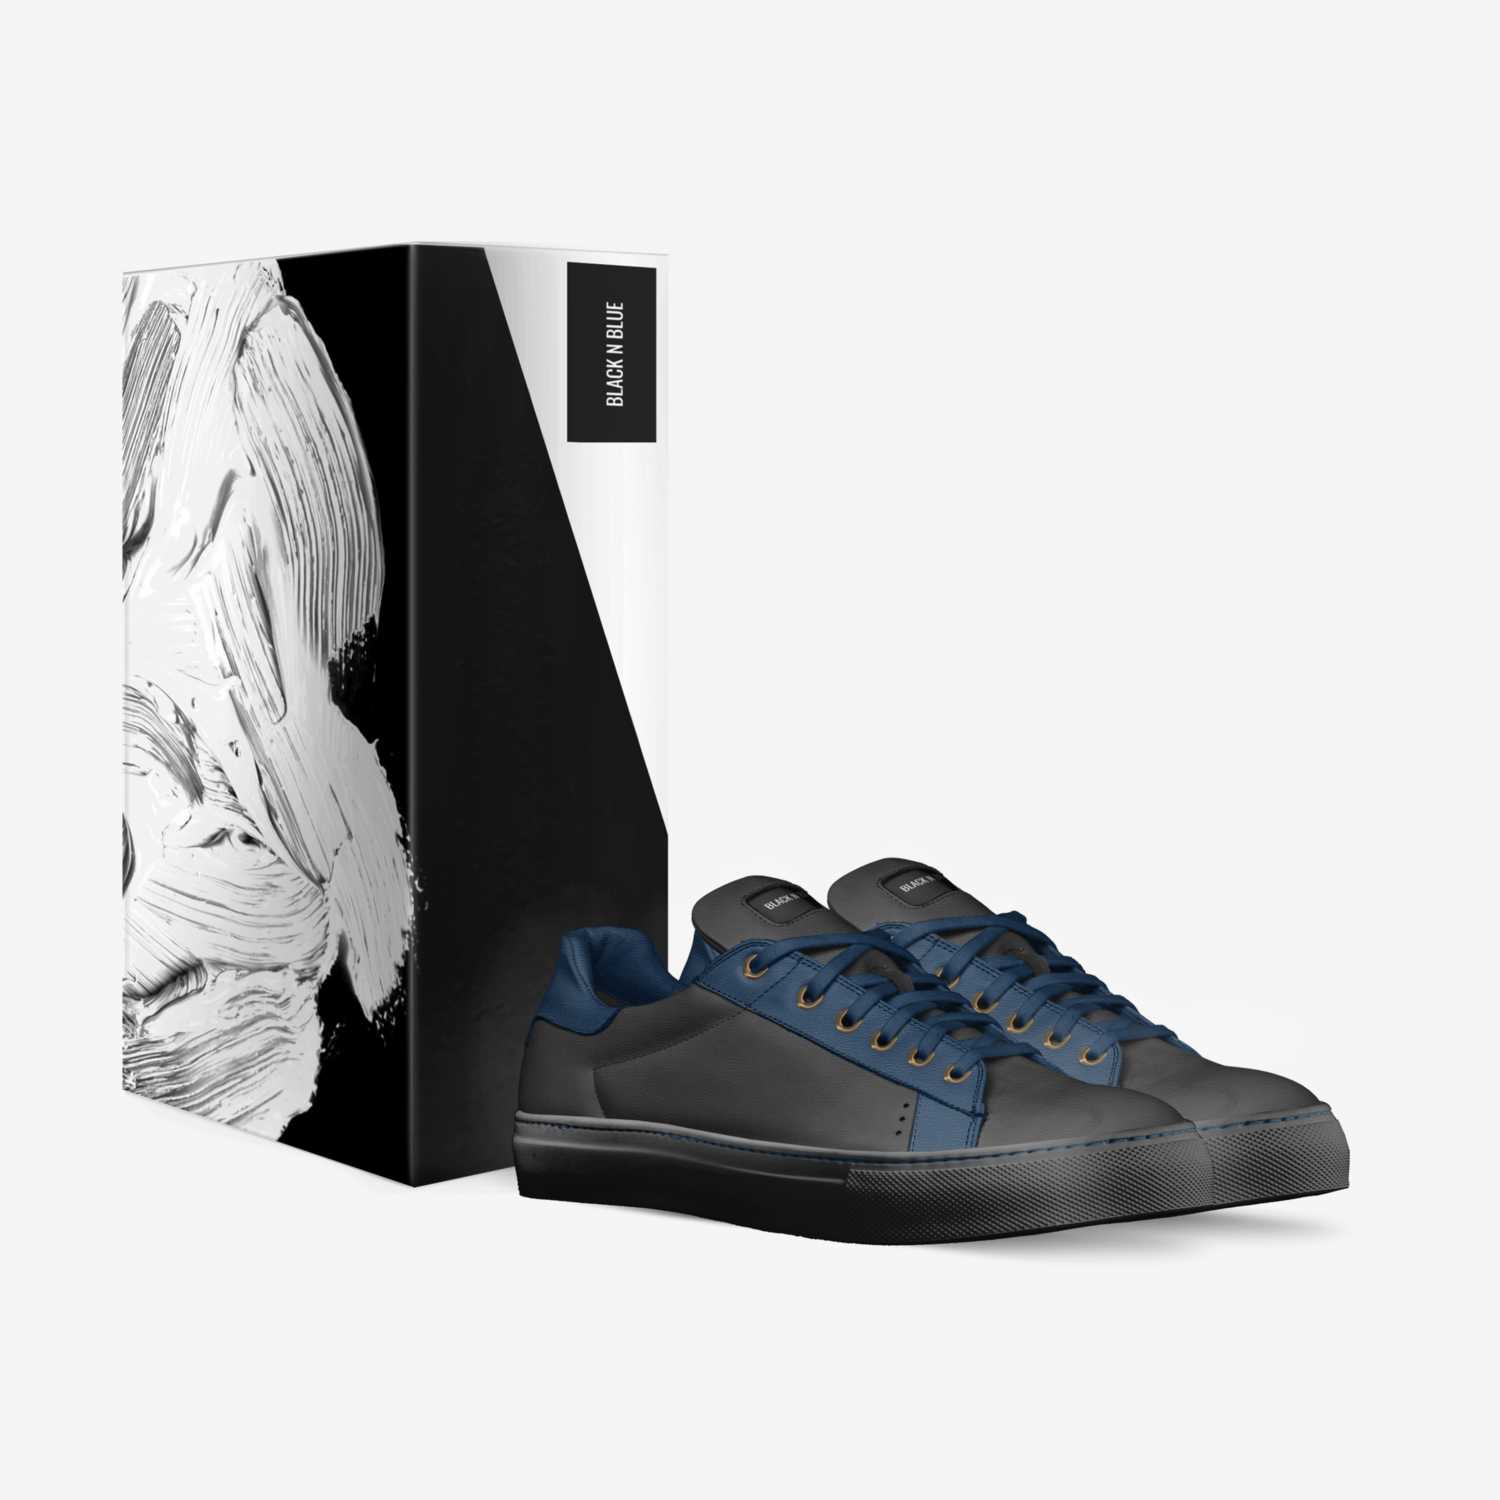 Black n Blue custom made in Italy shoes by Patrick Smith | Box view